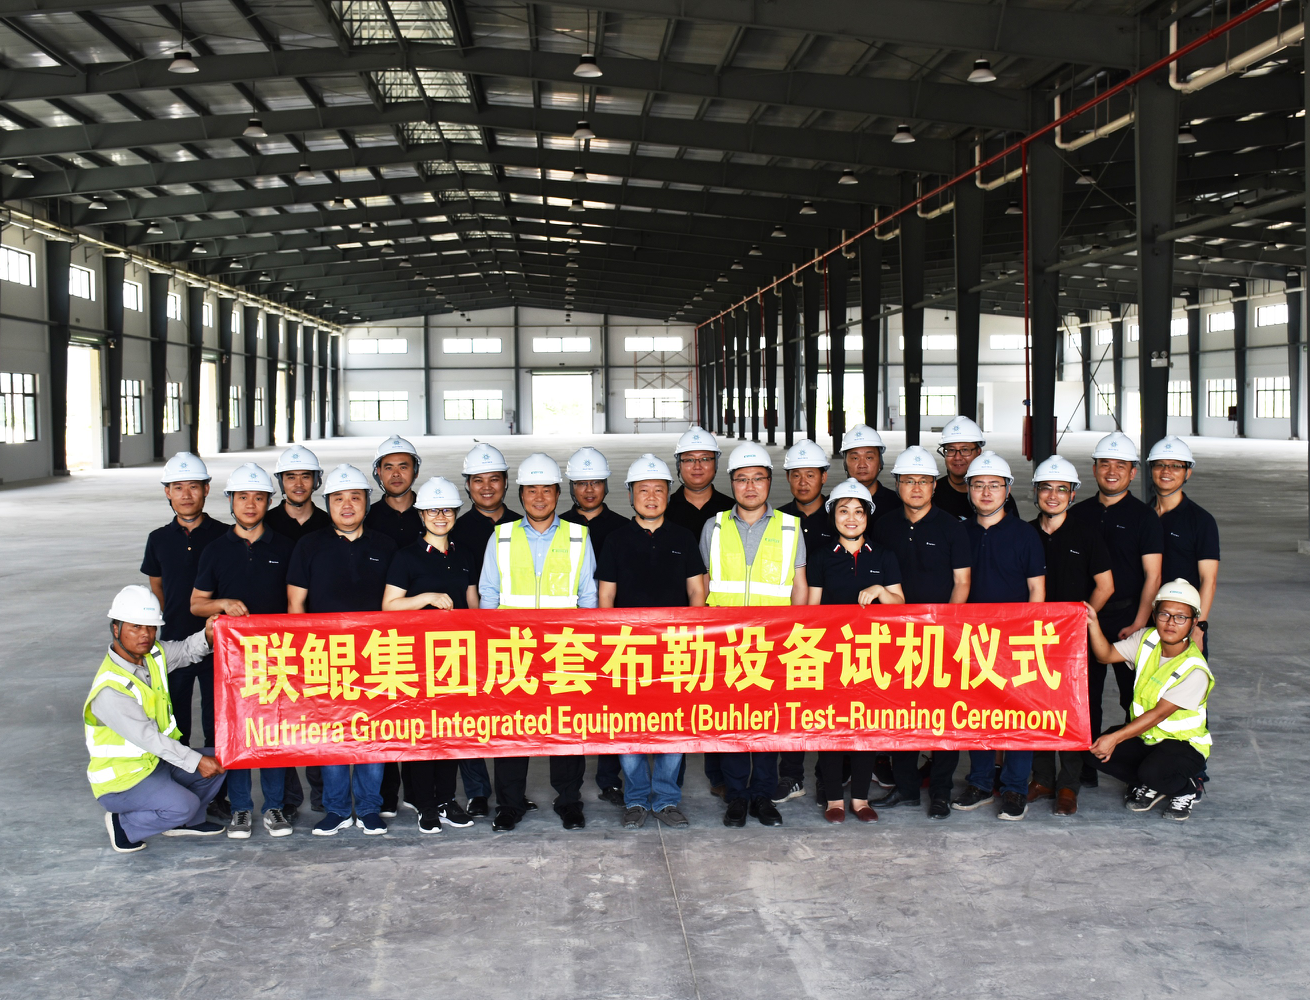 ​Integrated premix equipment (Buhler) test-running ceremony in Zhuhai Nutriera Industry Park was held successfully